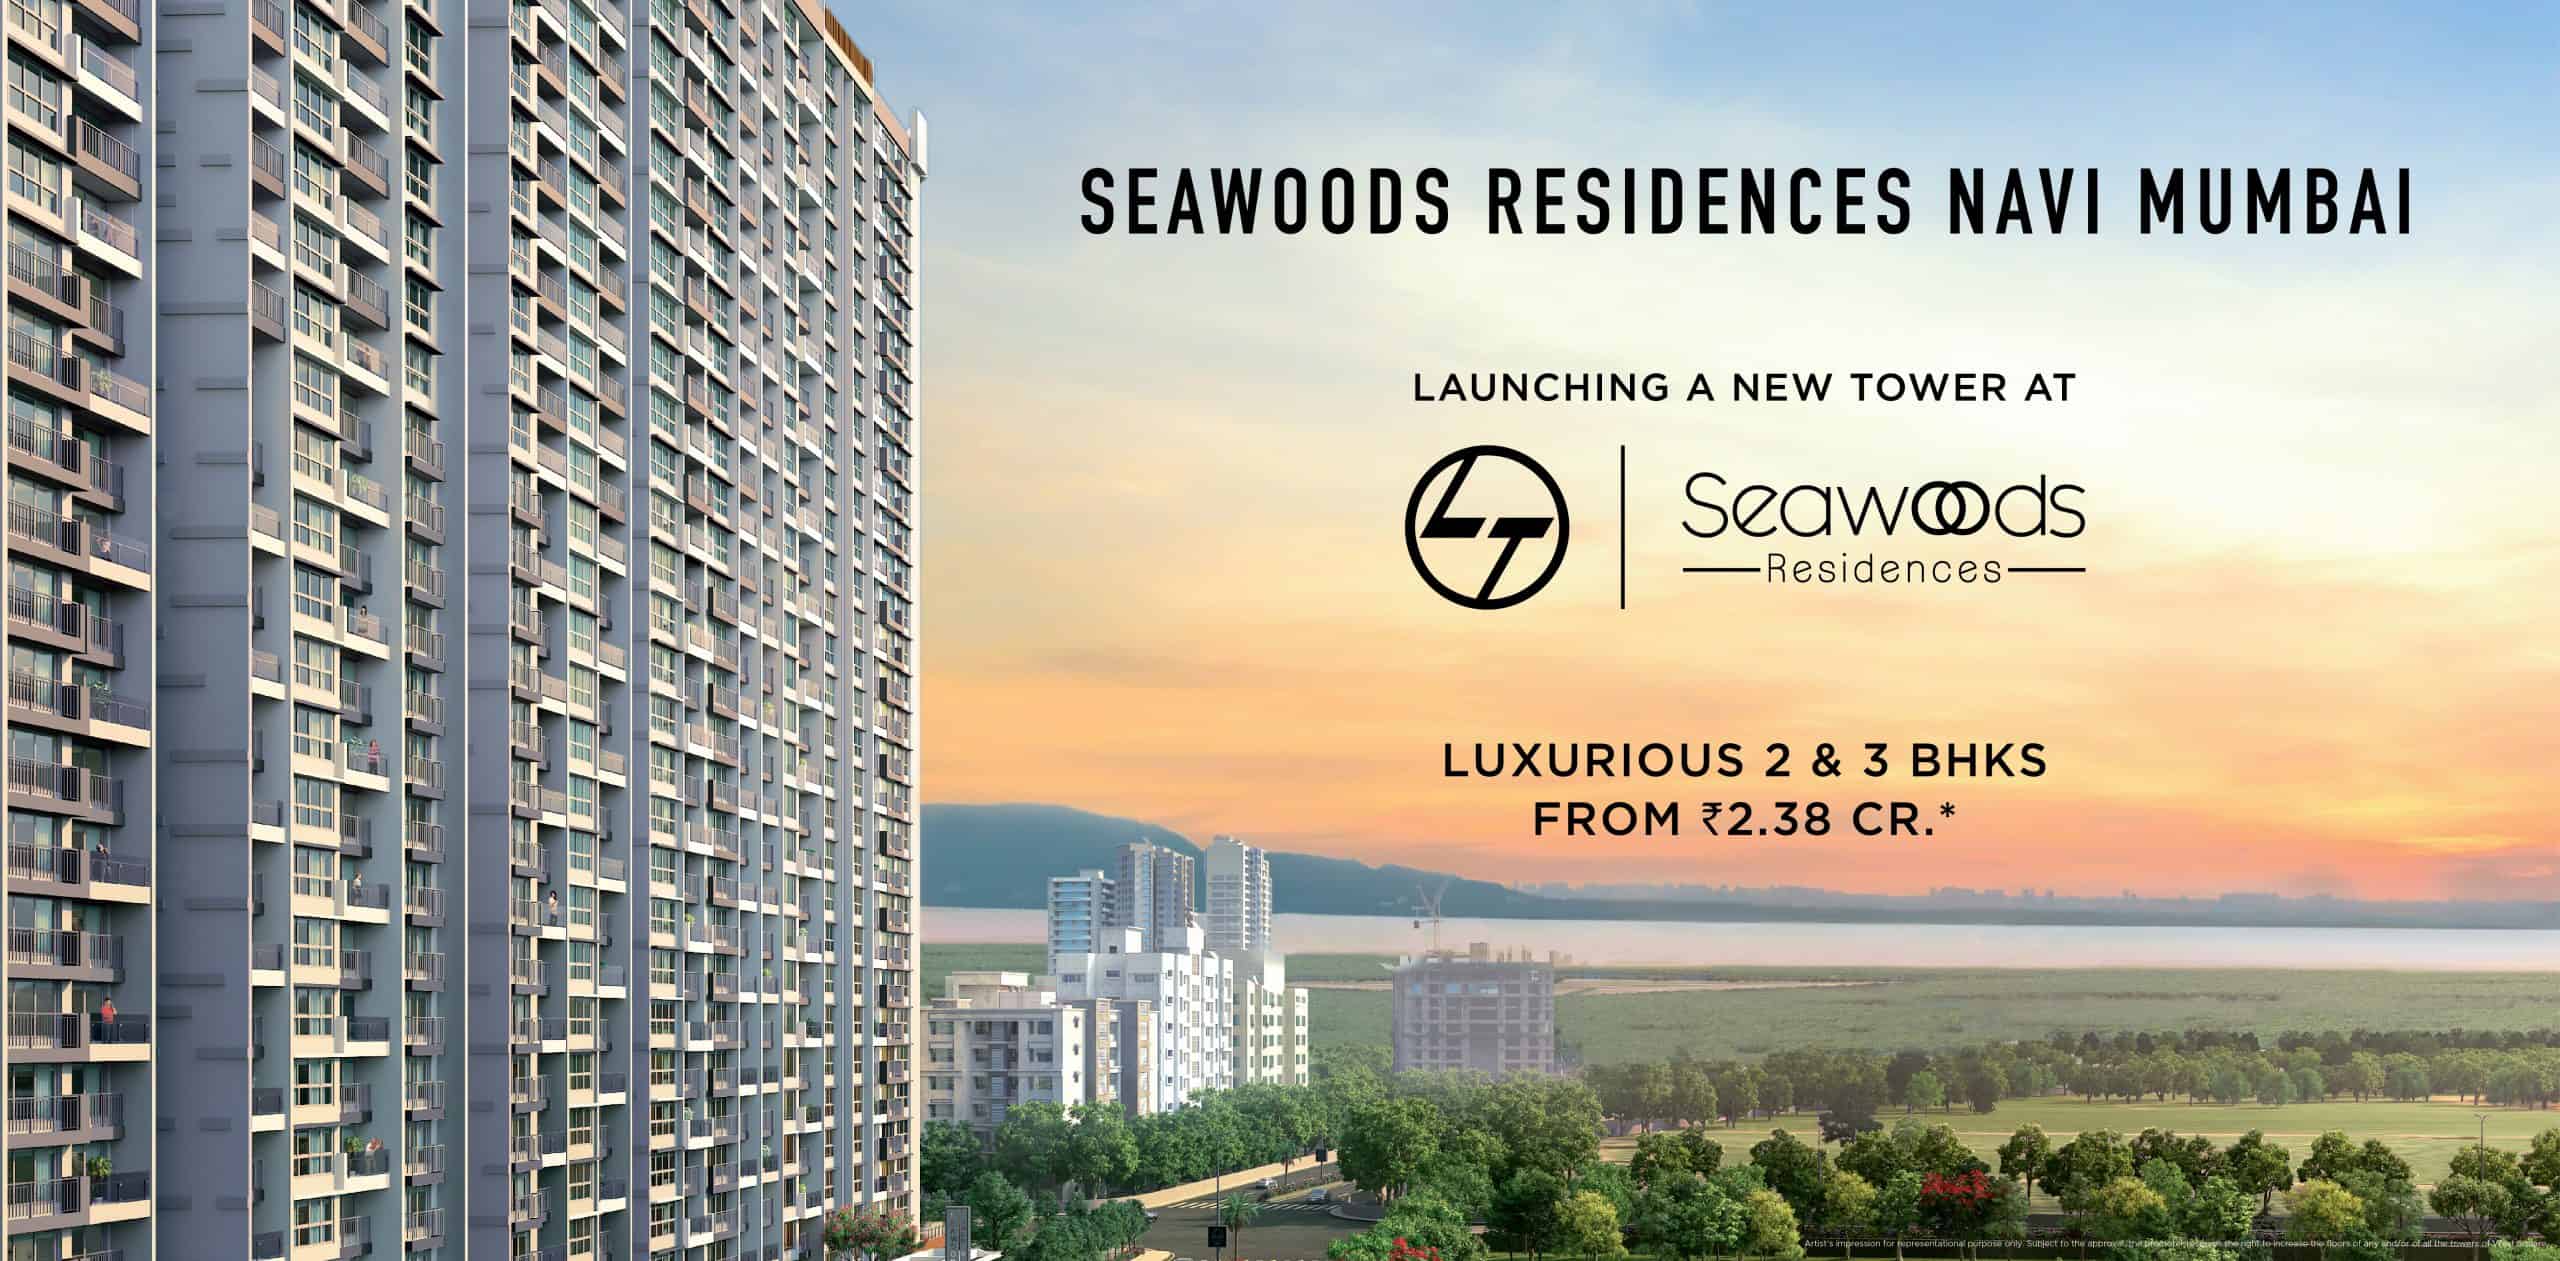 L&T Seawoods Residences - Launching a new Tower - desktop masthead